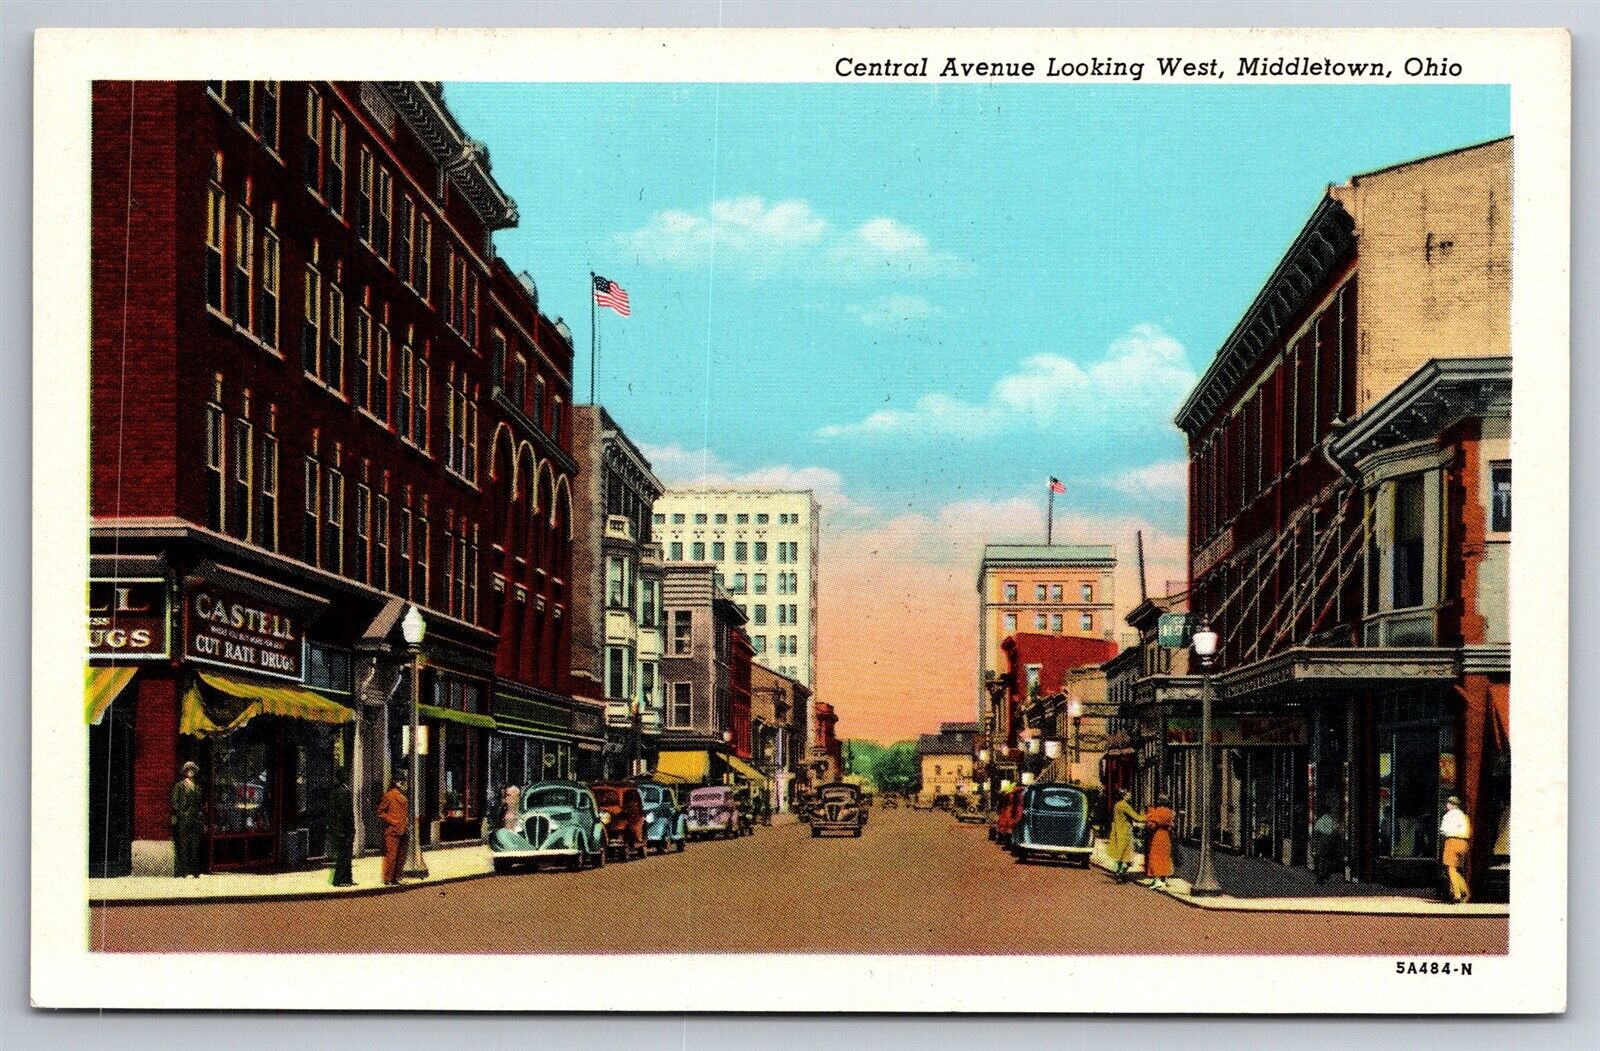 Central Ave Downtown Castell Drugs Stores Cars Middletown OH C1940s Postcard V15